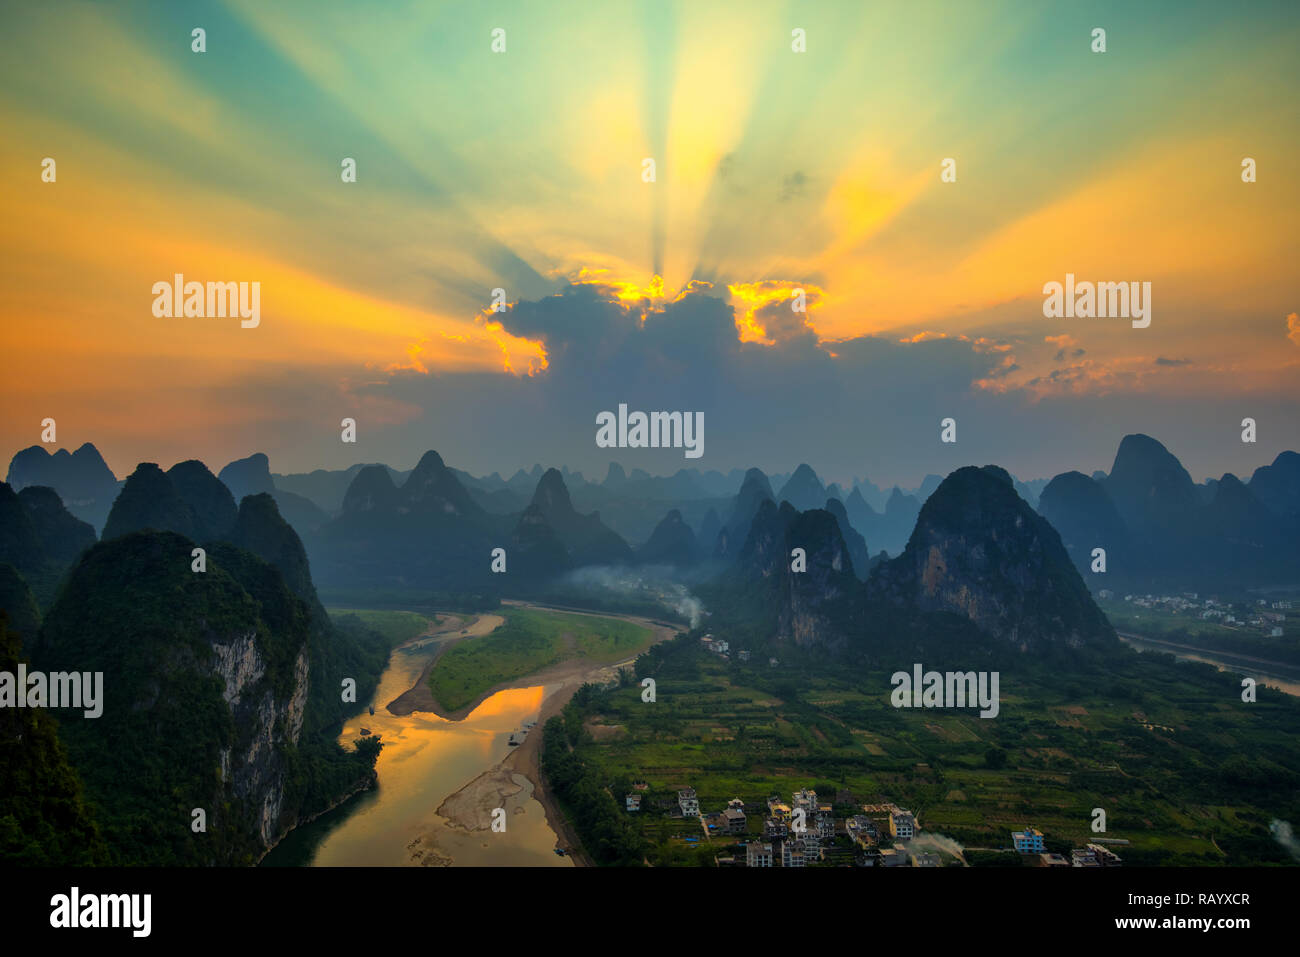 Landscape of Guilin , Li River and Karst mountains called Laozhai mount, Guangxi Province, China Stock Photo